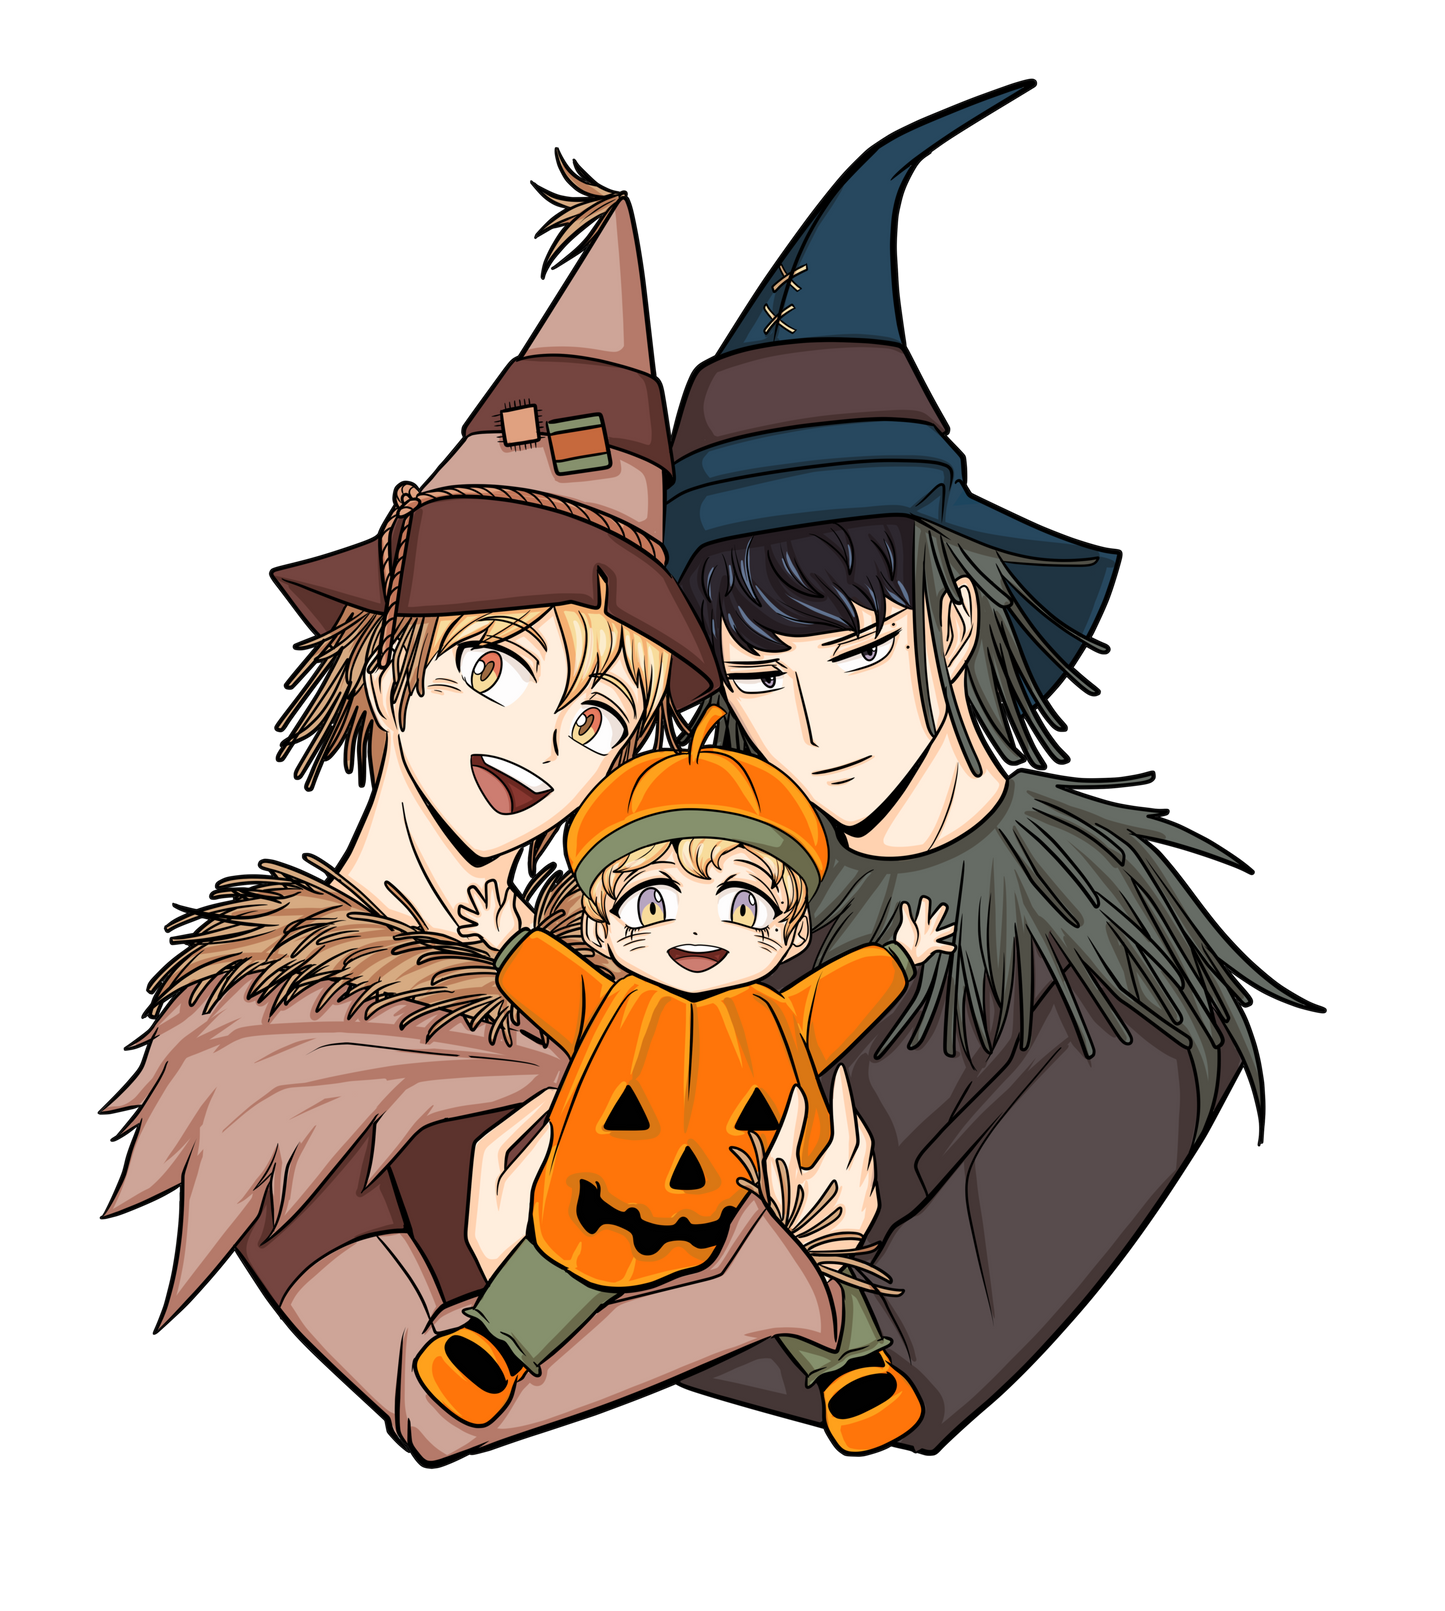 BL Halloween (collab with MinMin)